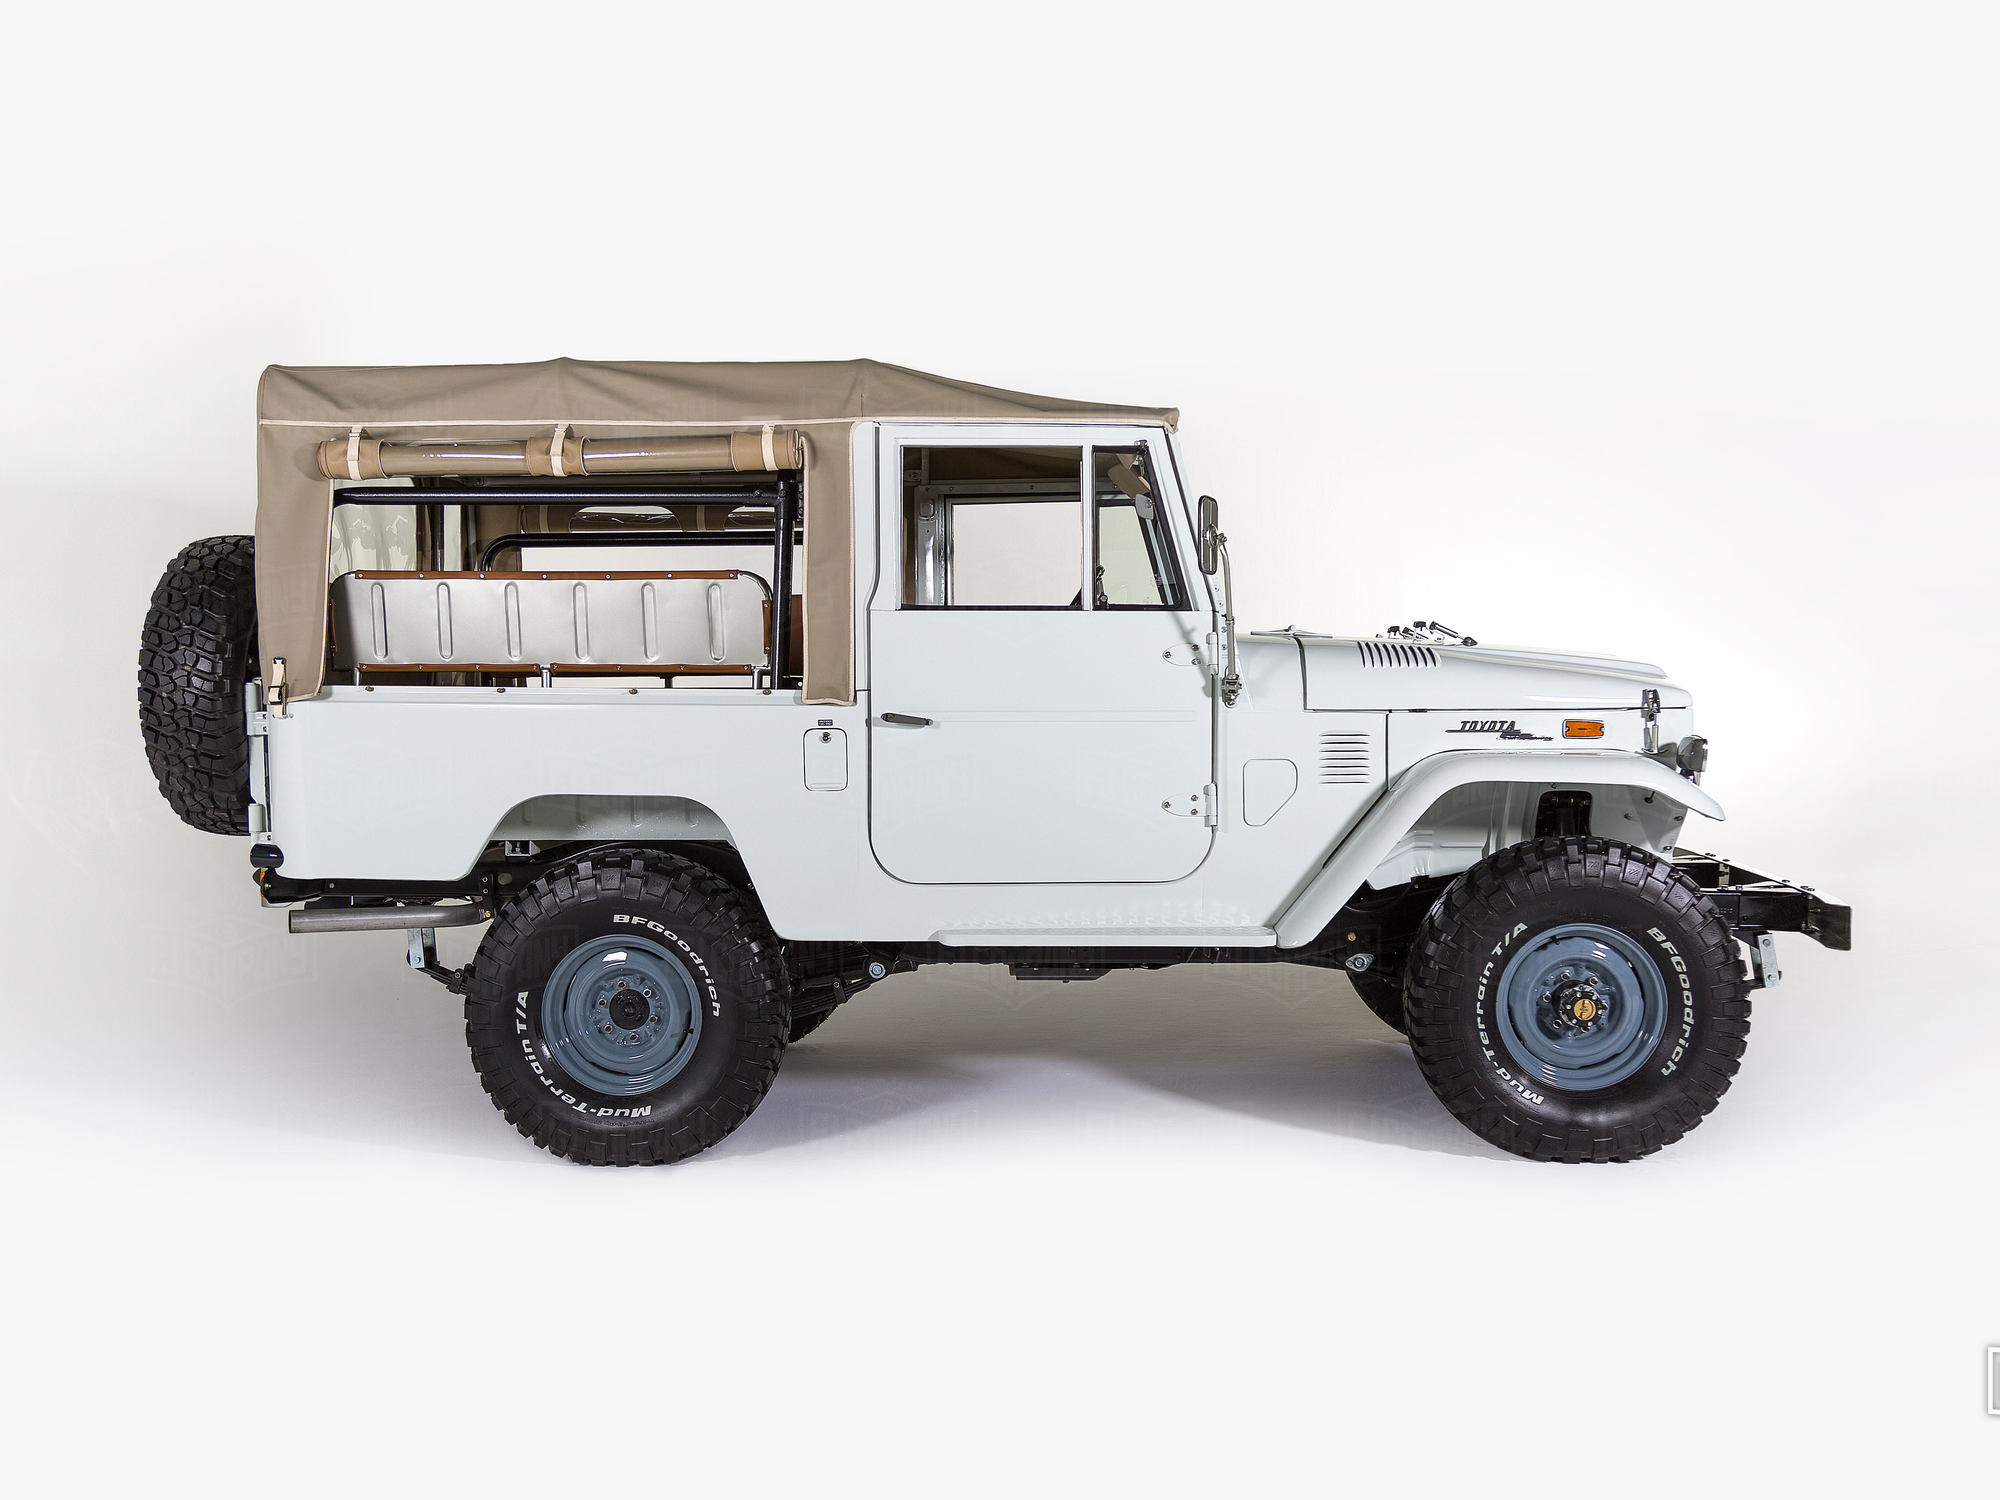 One of our favorite FJ43's of all time